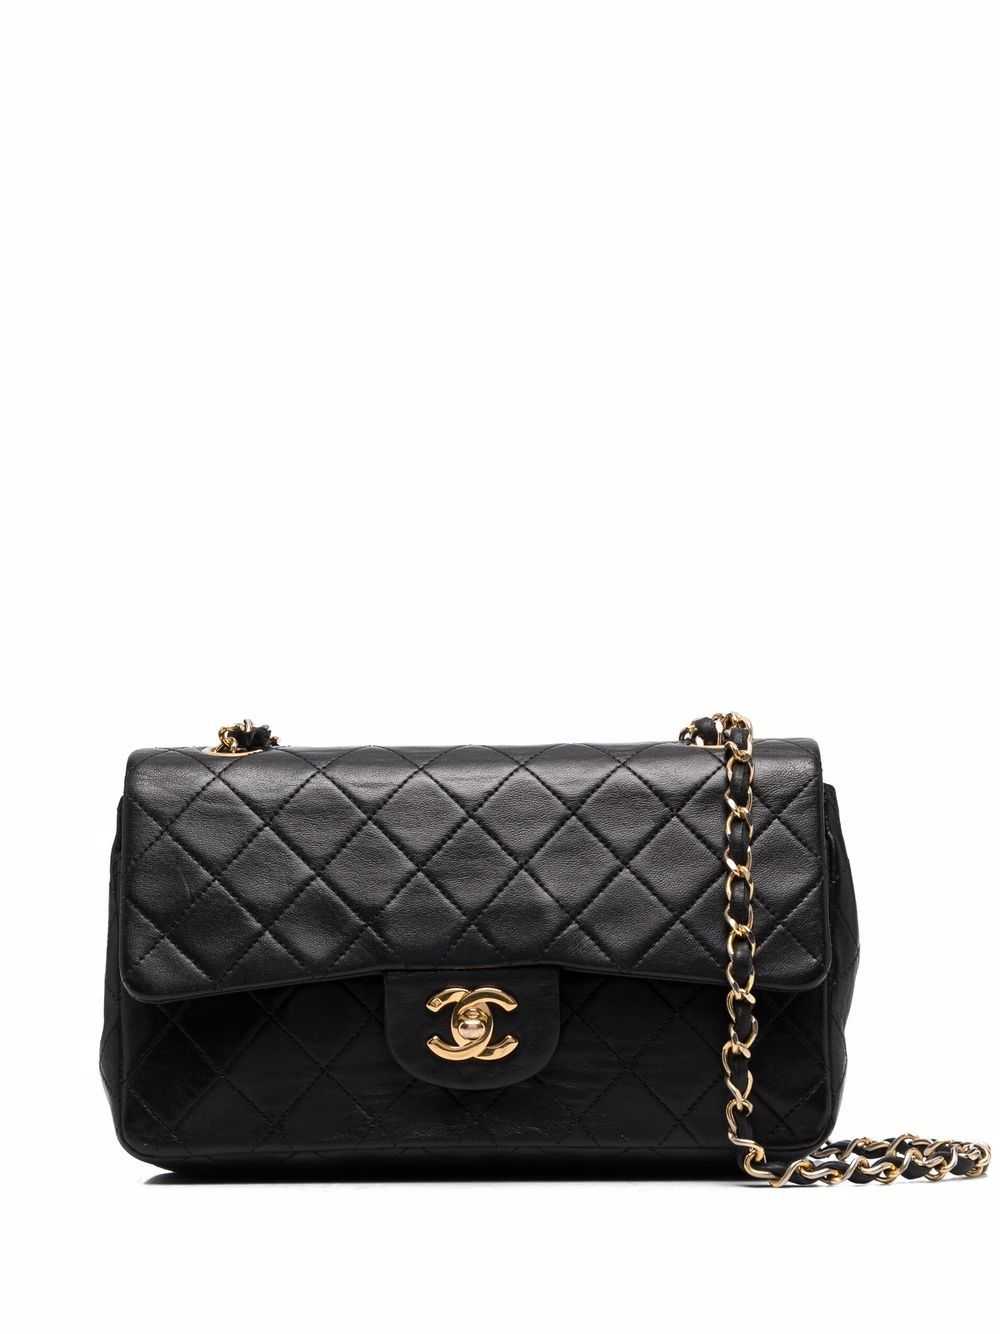 Chanel Travel Kit Vanity Case Quilted Calfskin Small